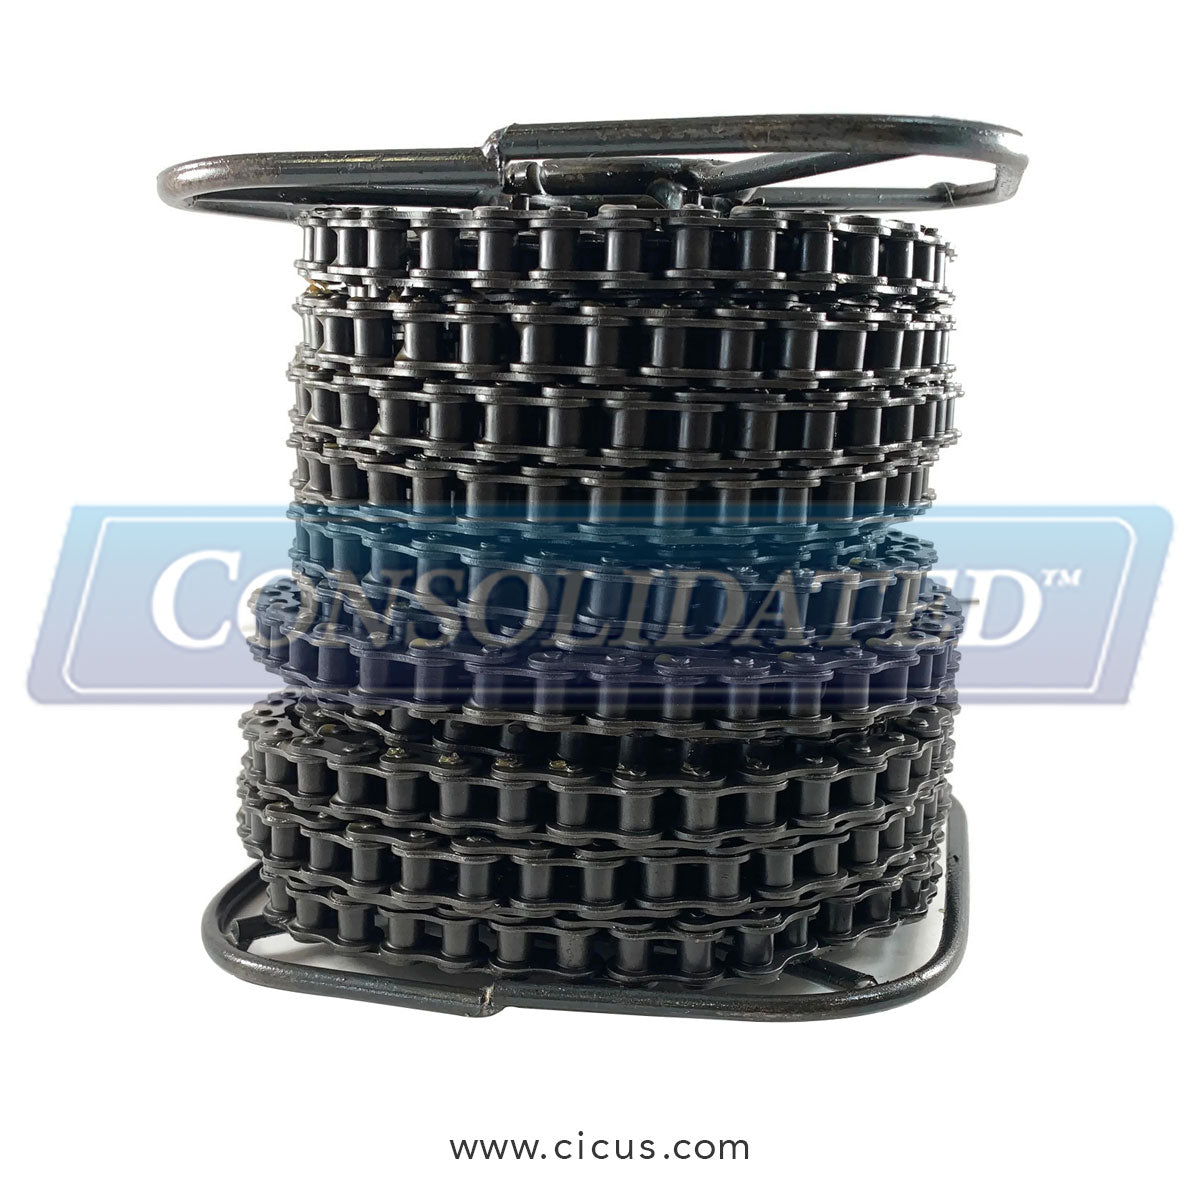 CICUS 50 Riv 10ft Roller Chain [120305]